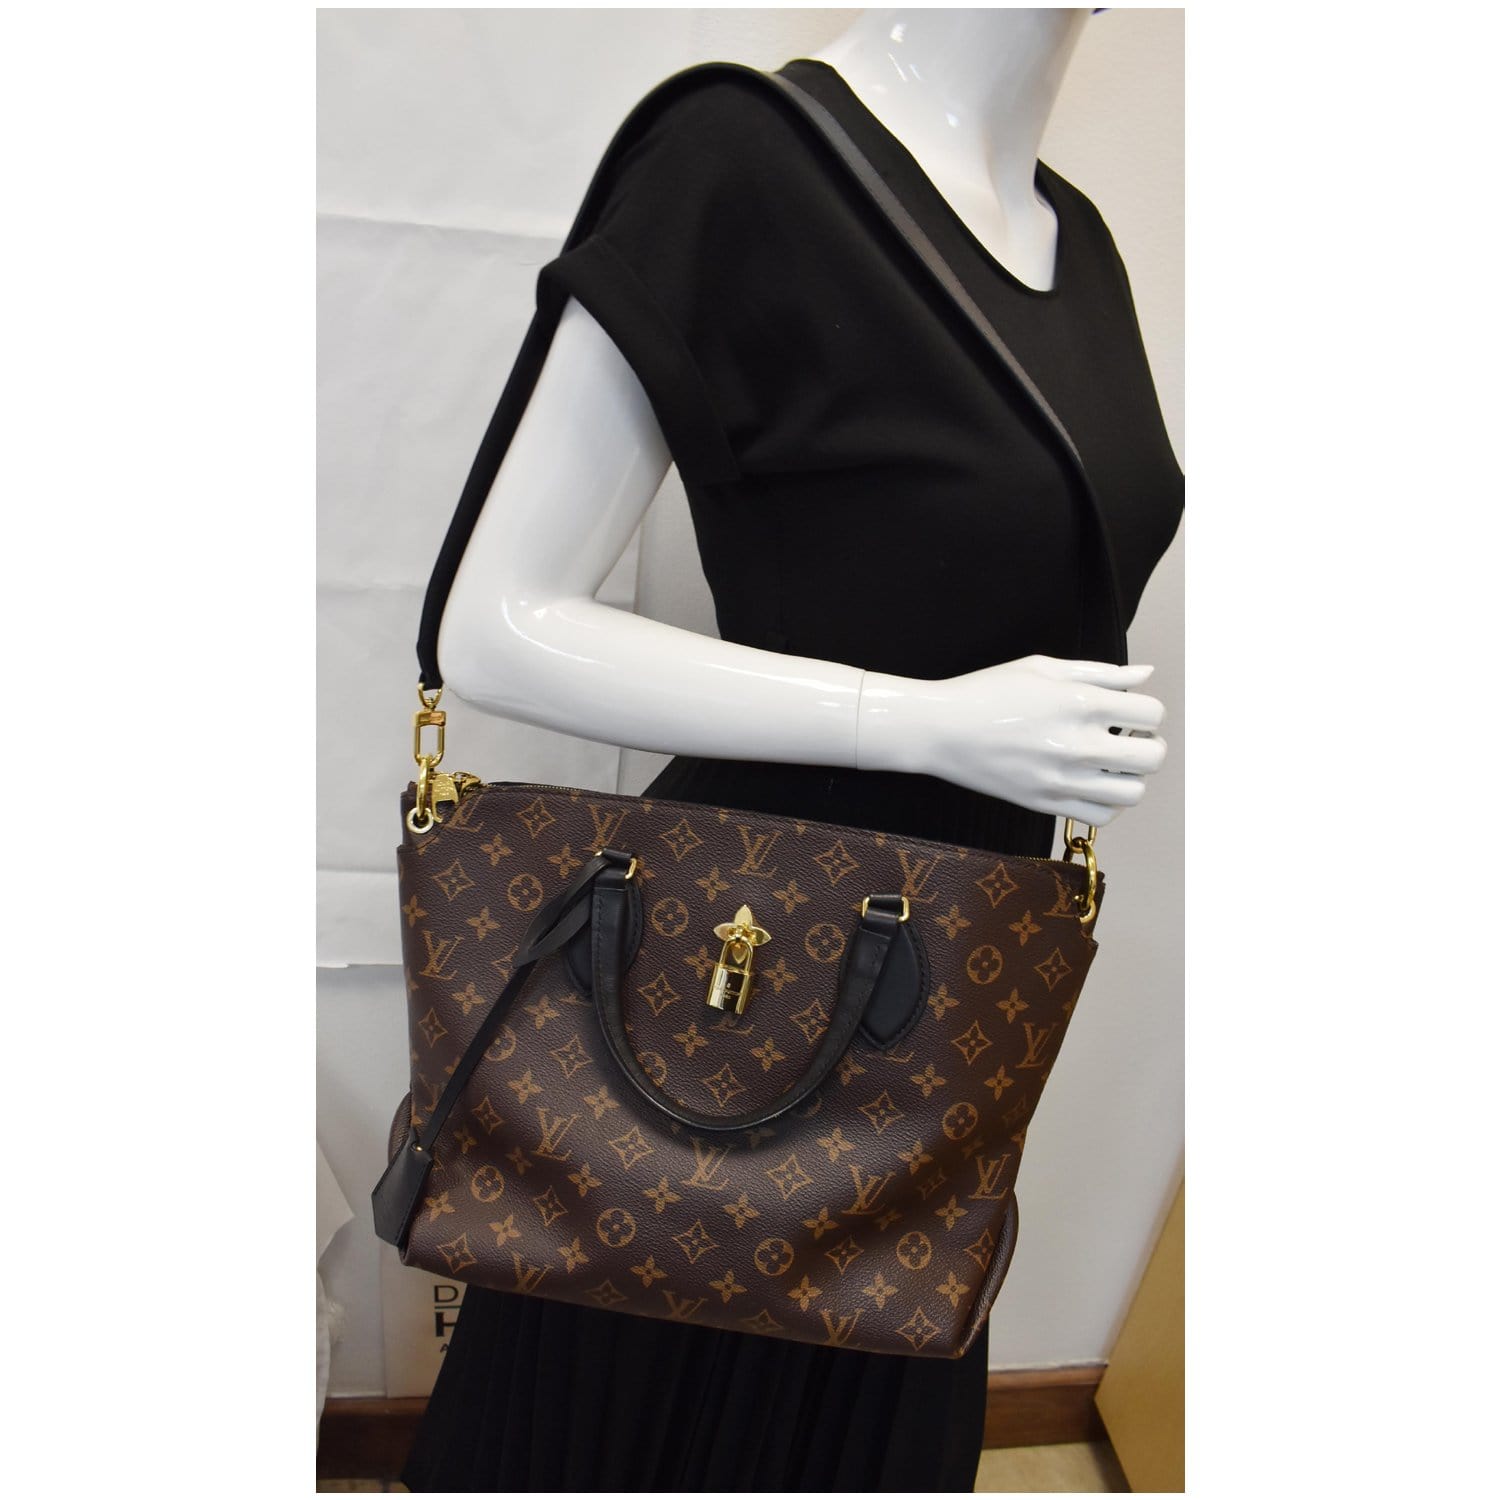 Louis Vuitton Monogram Canvas Flower Zipped Tote mm - Handbag | Pre-owned & Certified | used Second Hand | Unisex